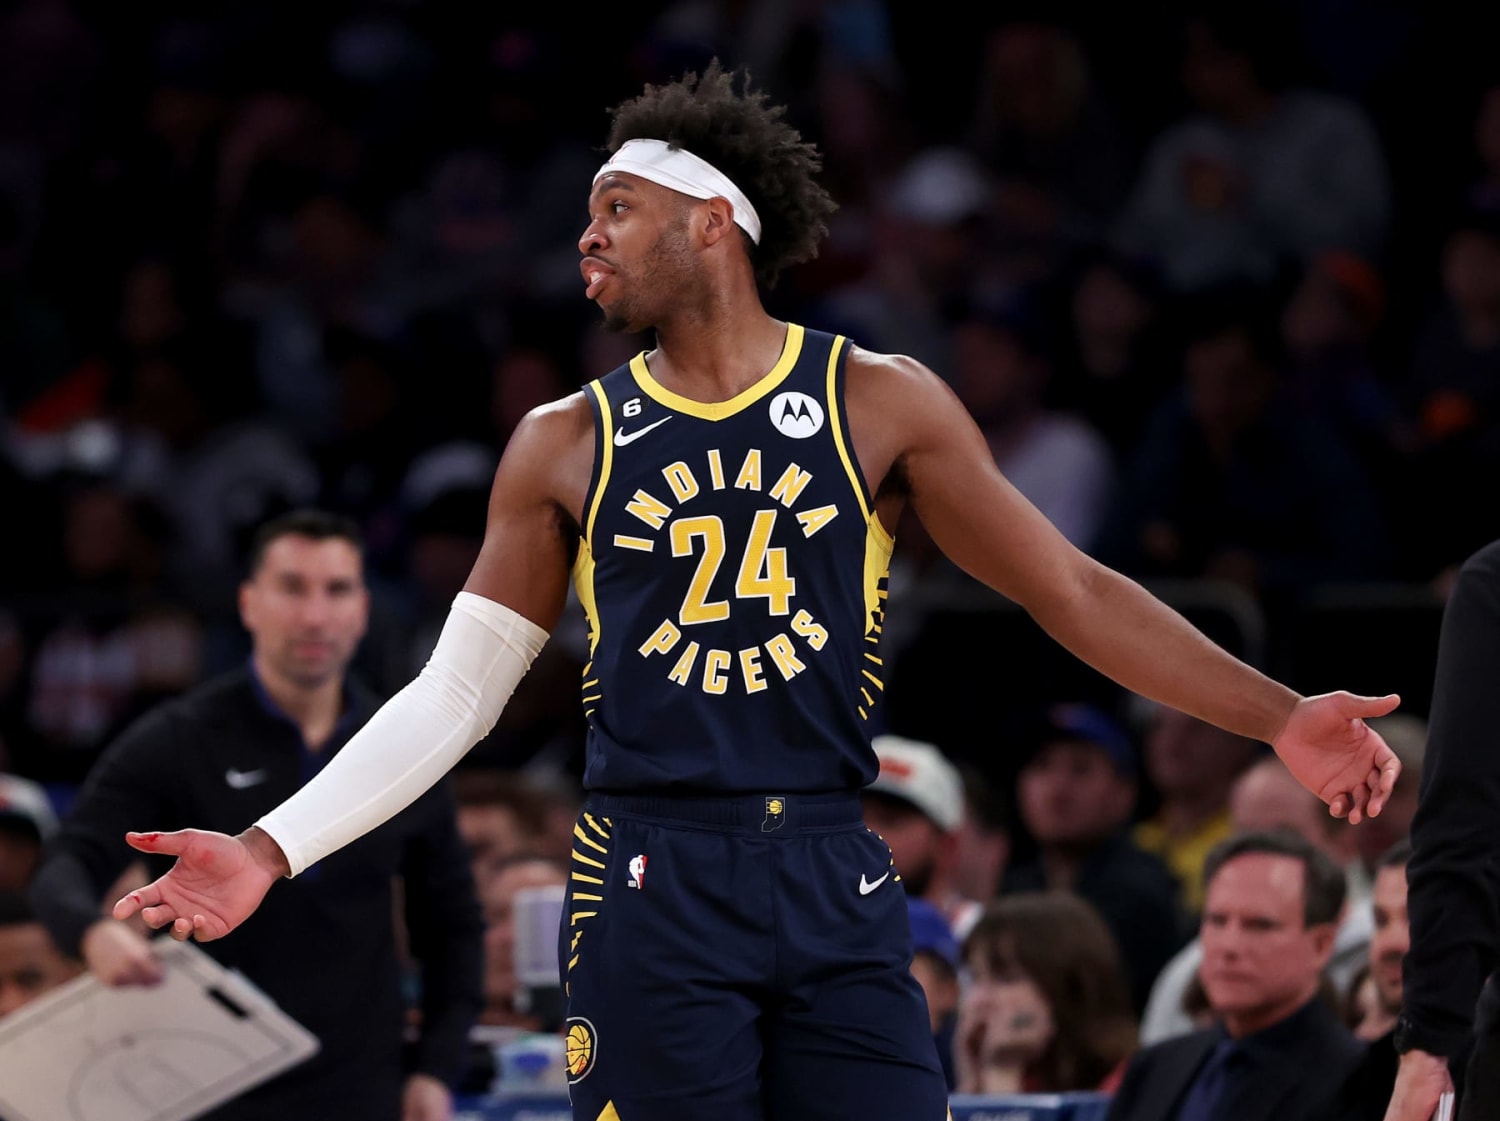 Torrey Craig Played For The Phoenix Suns And Milwaukee Bucks Last Season  And Now Has Signed With The Indiana Pacers - Sports Illustrated Indiana  Pacers news, analysis and more